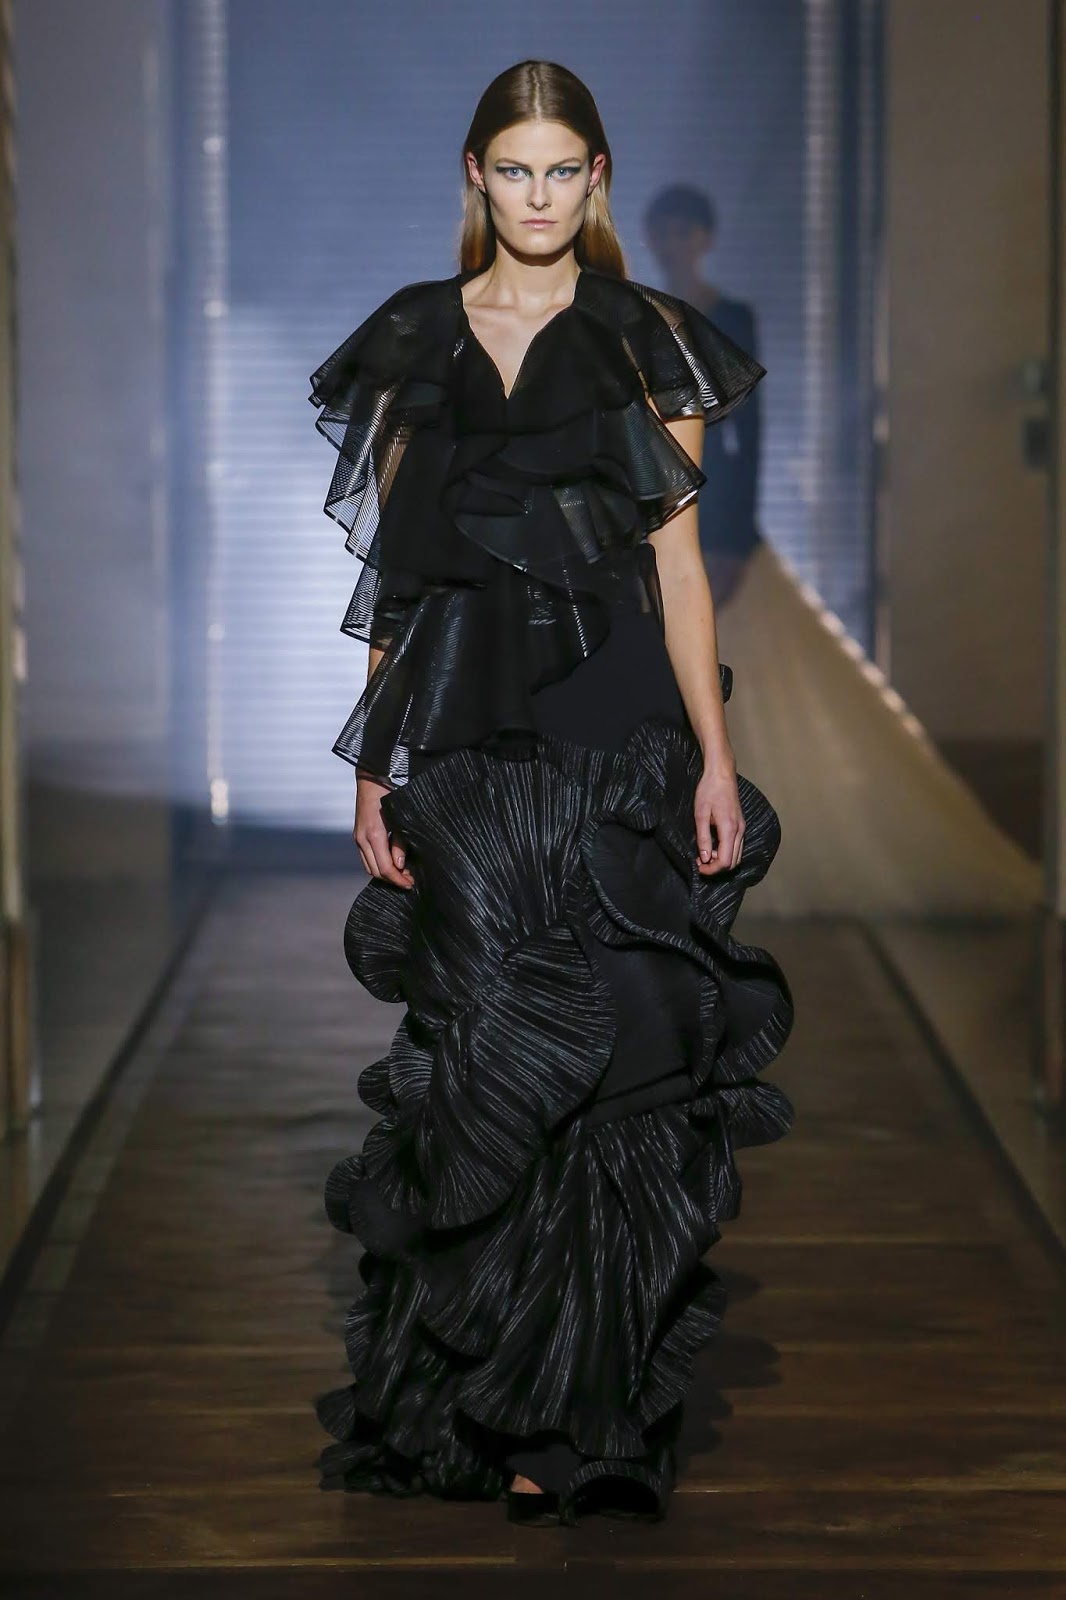 GIVENCHY HAUTE COUTURE September 26, 2018 | ZsaZsa Bellagio - Like No Other